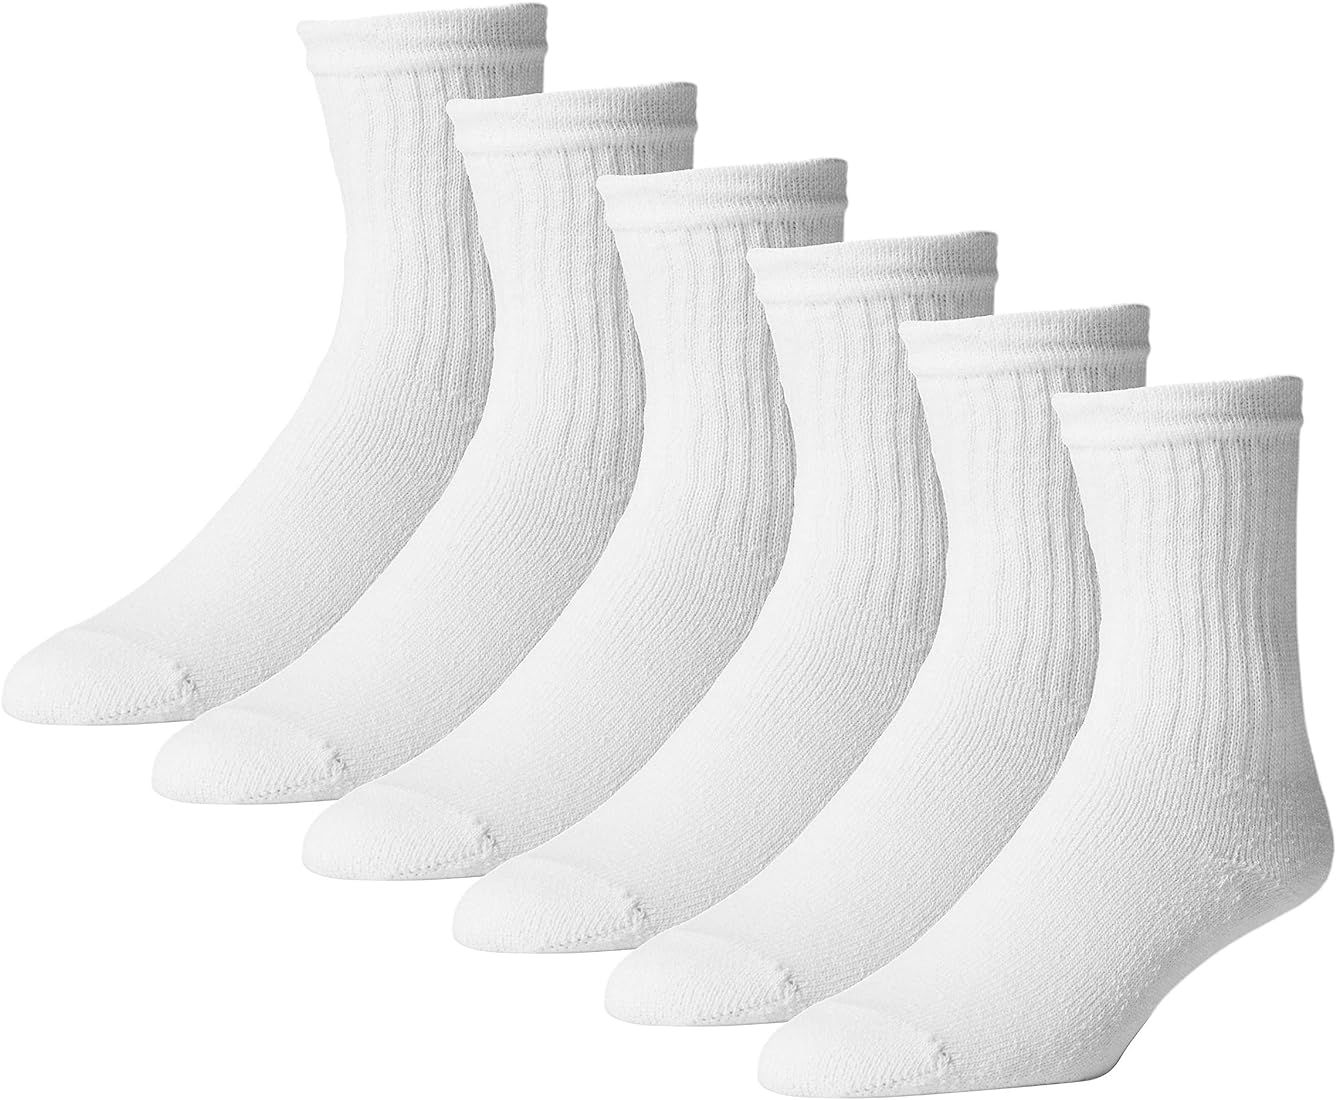 Everyday Crew Socks for Women - Cotton Socks by American Made Socks - 12-Pack | Amazon (US)